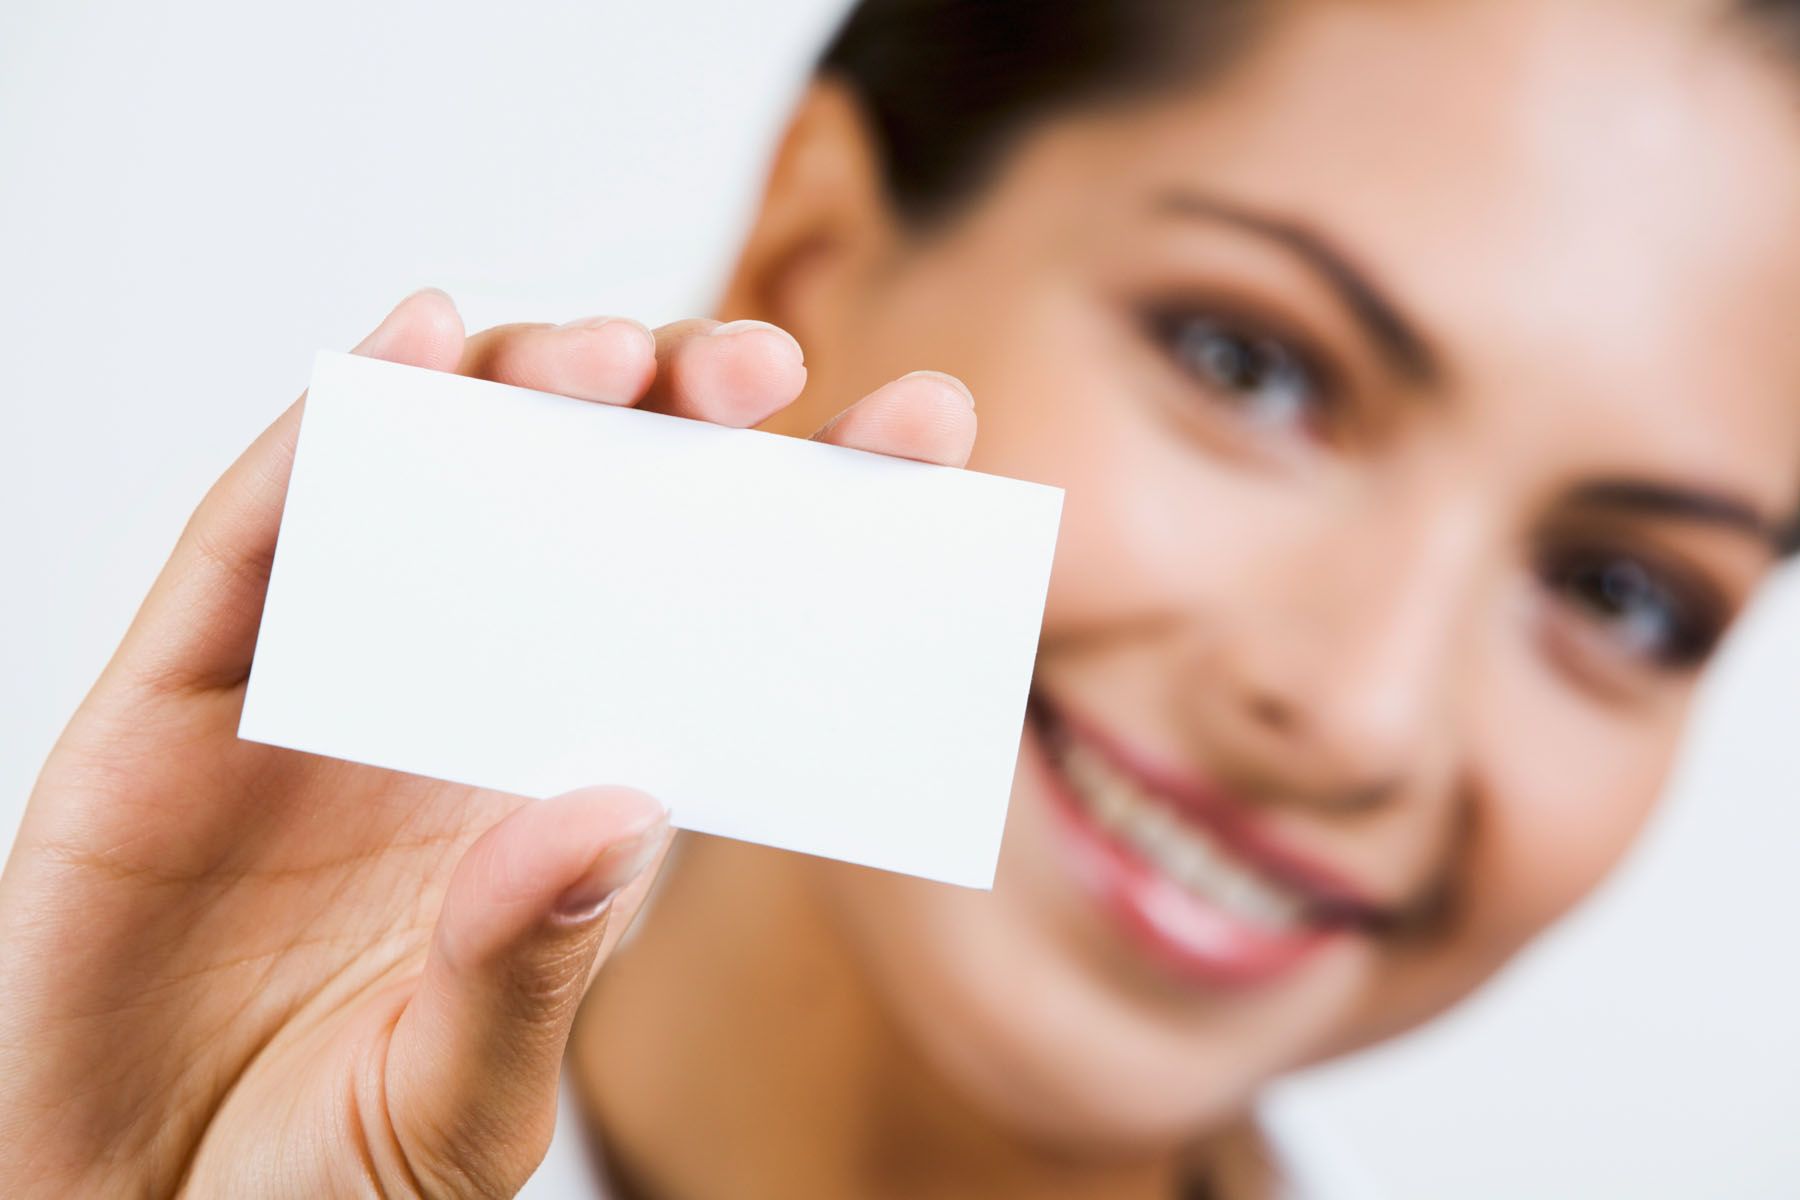 Holding blank business card material 23724 Wallpaper